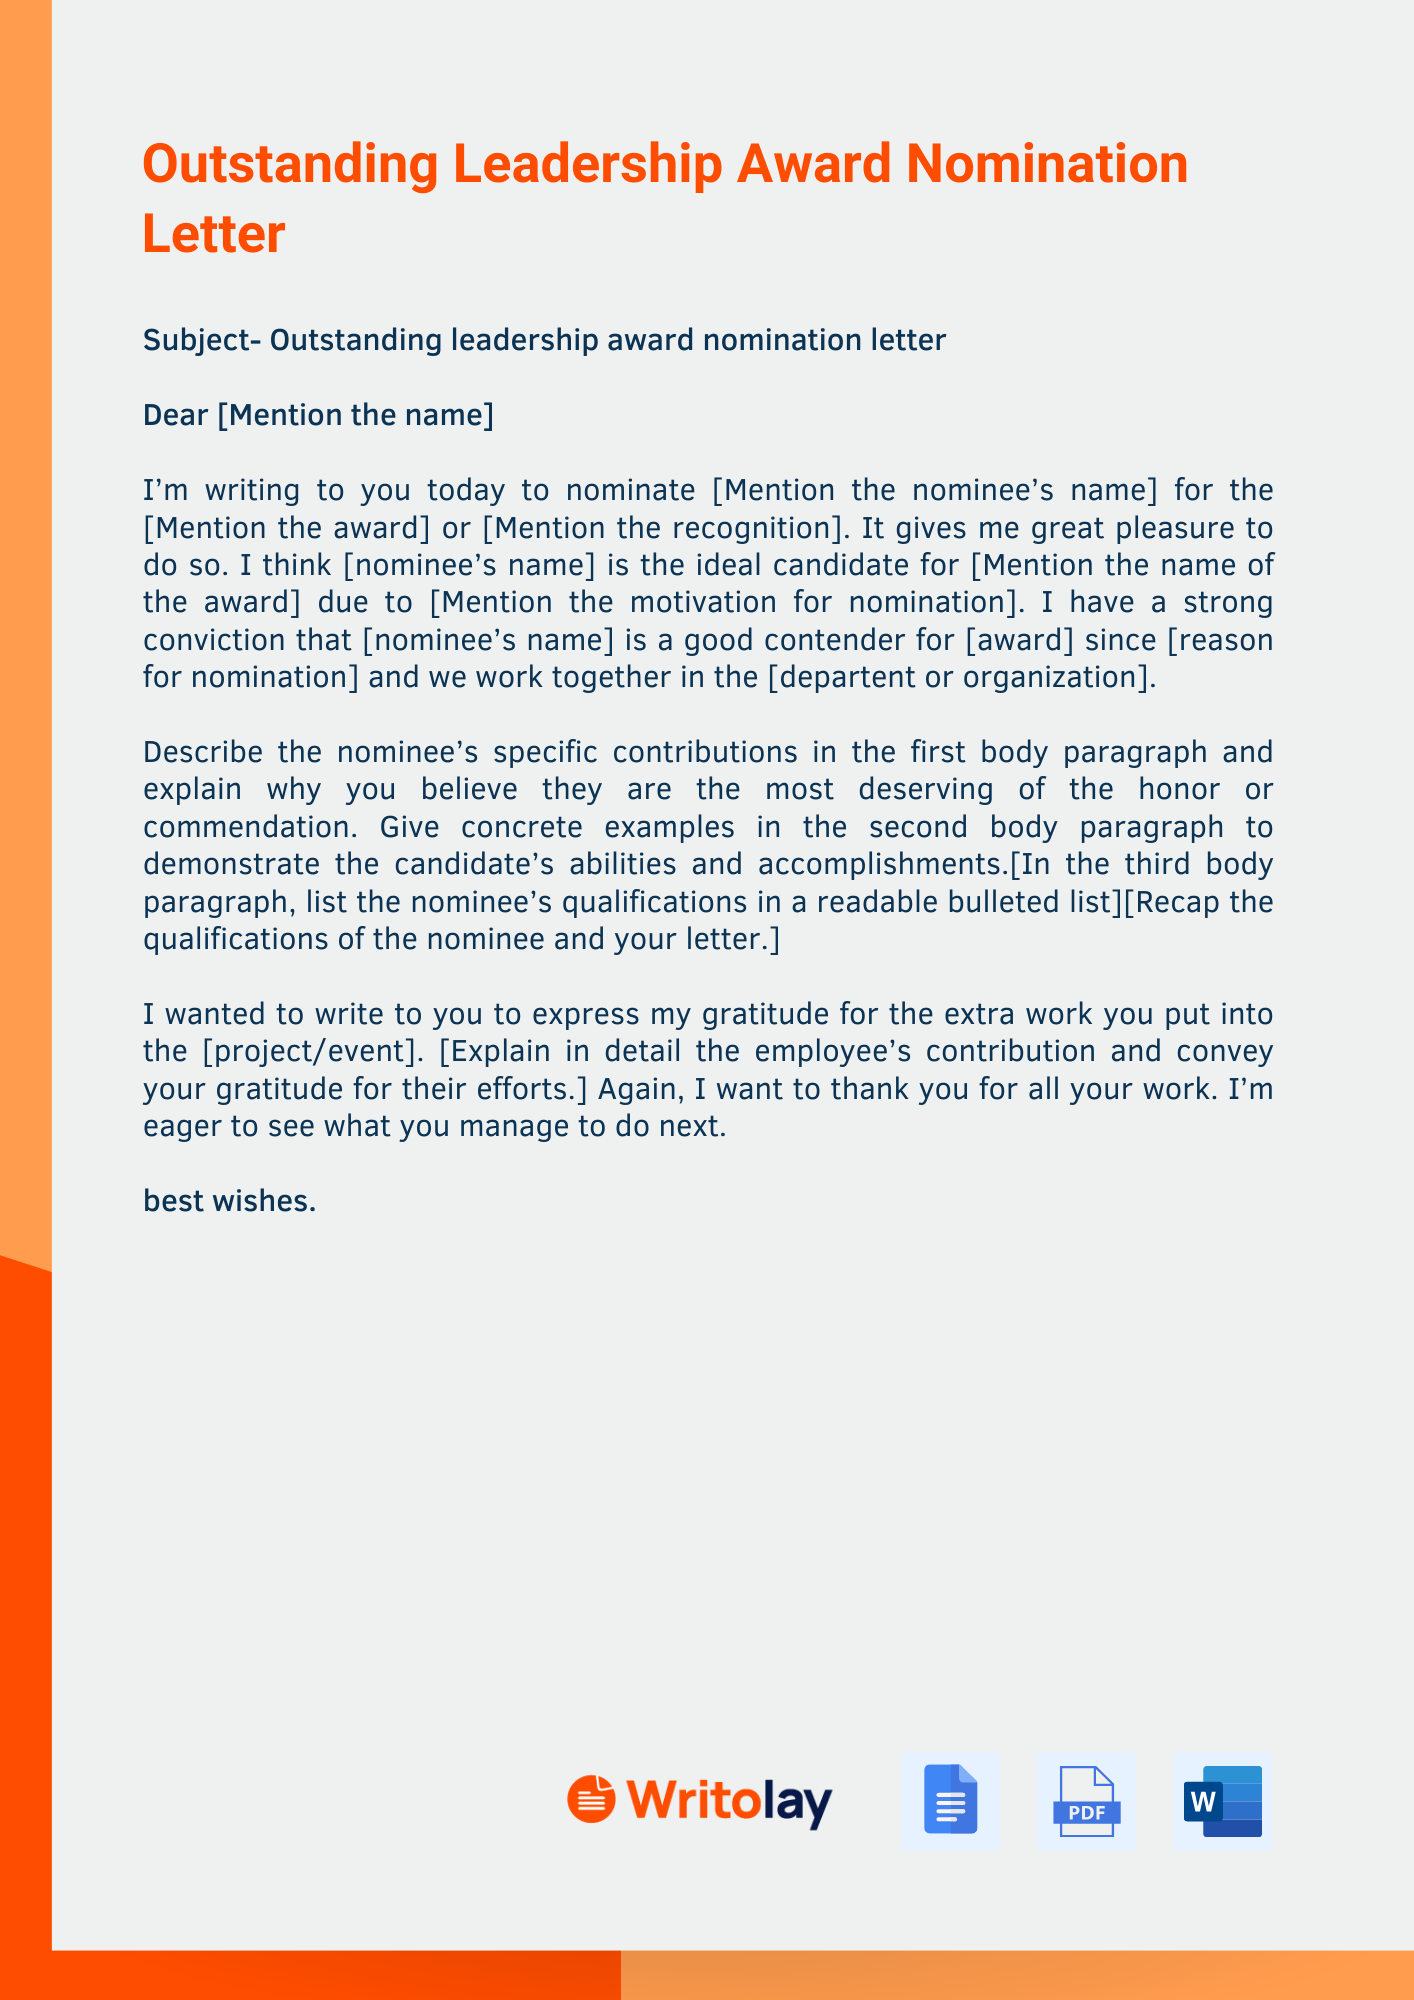 How to Write a Nomination Letter 16 Free Templates Writolay